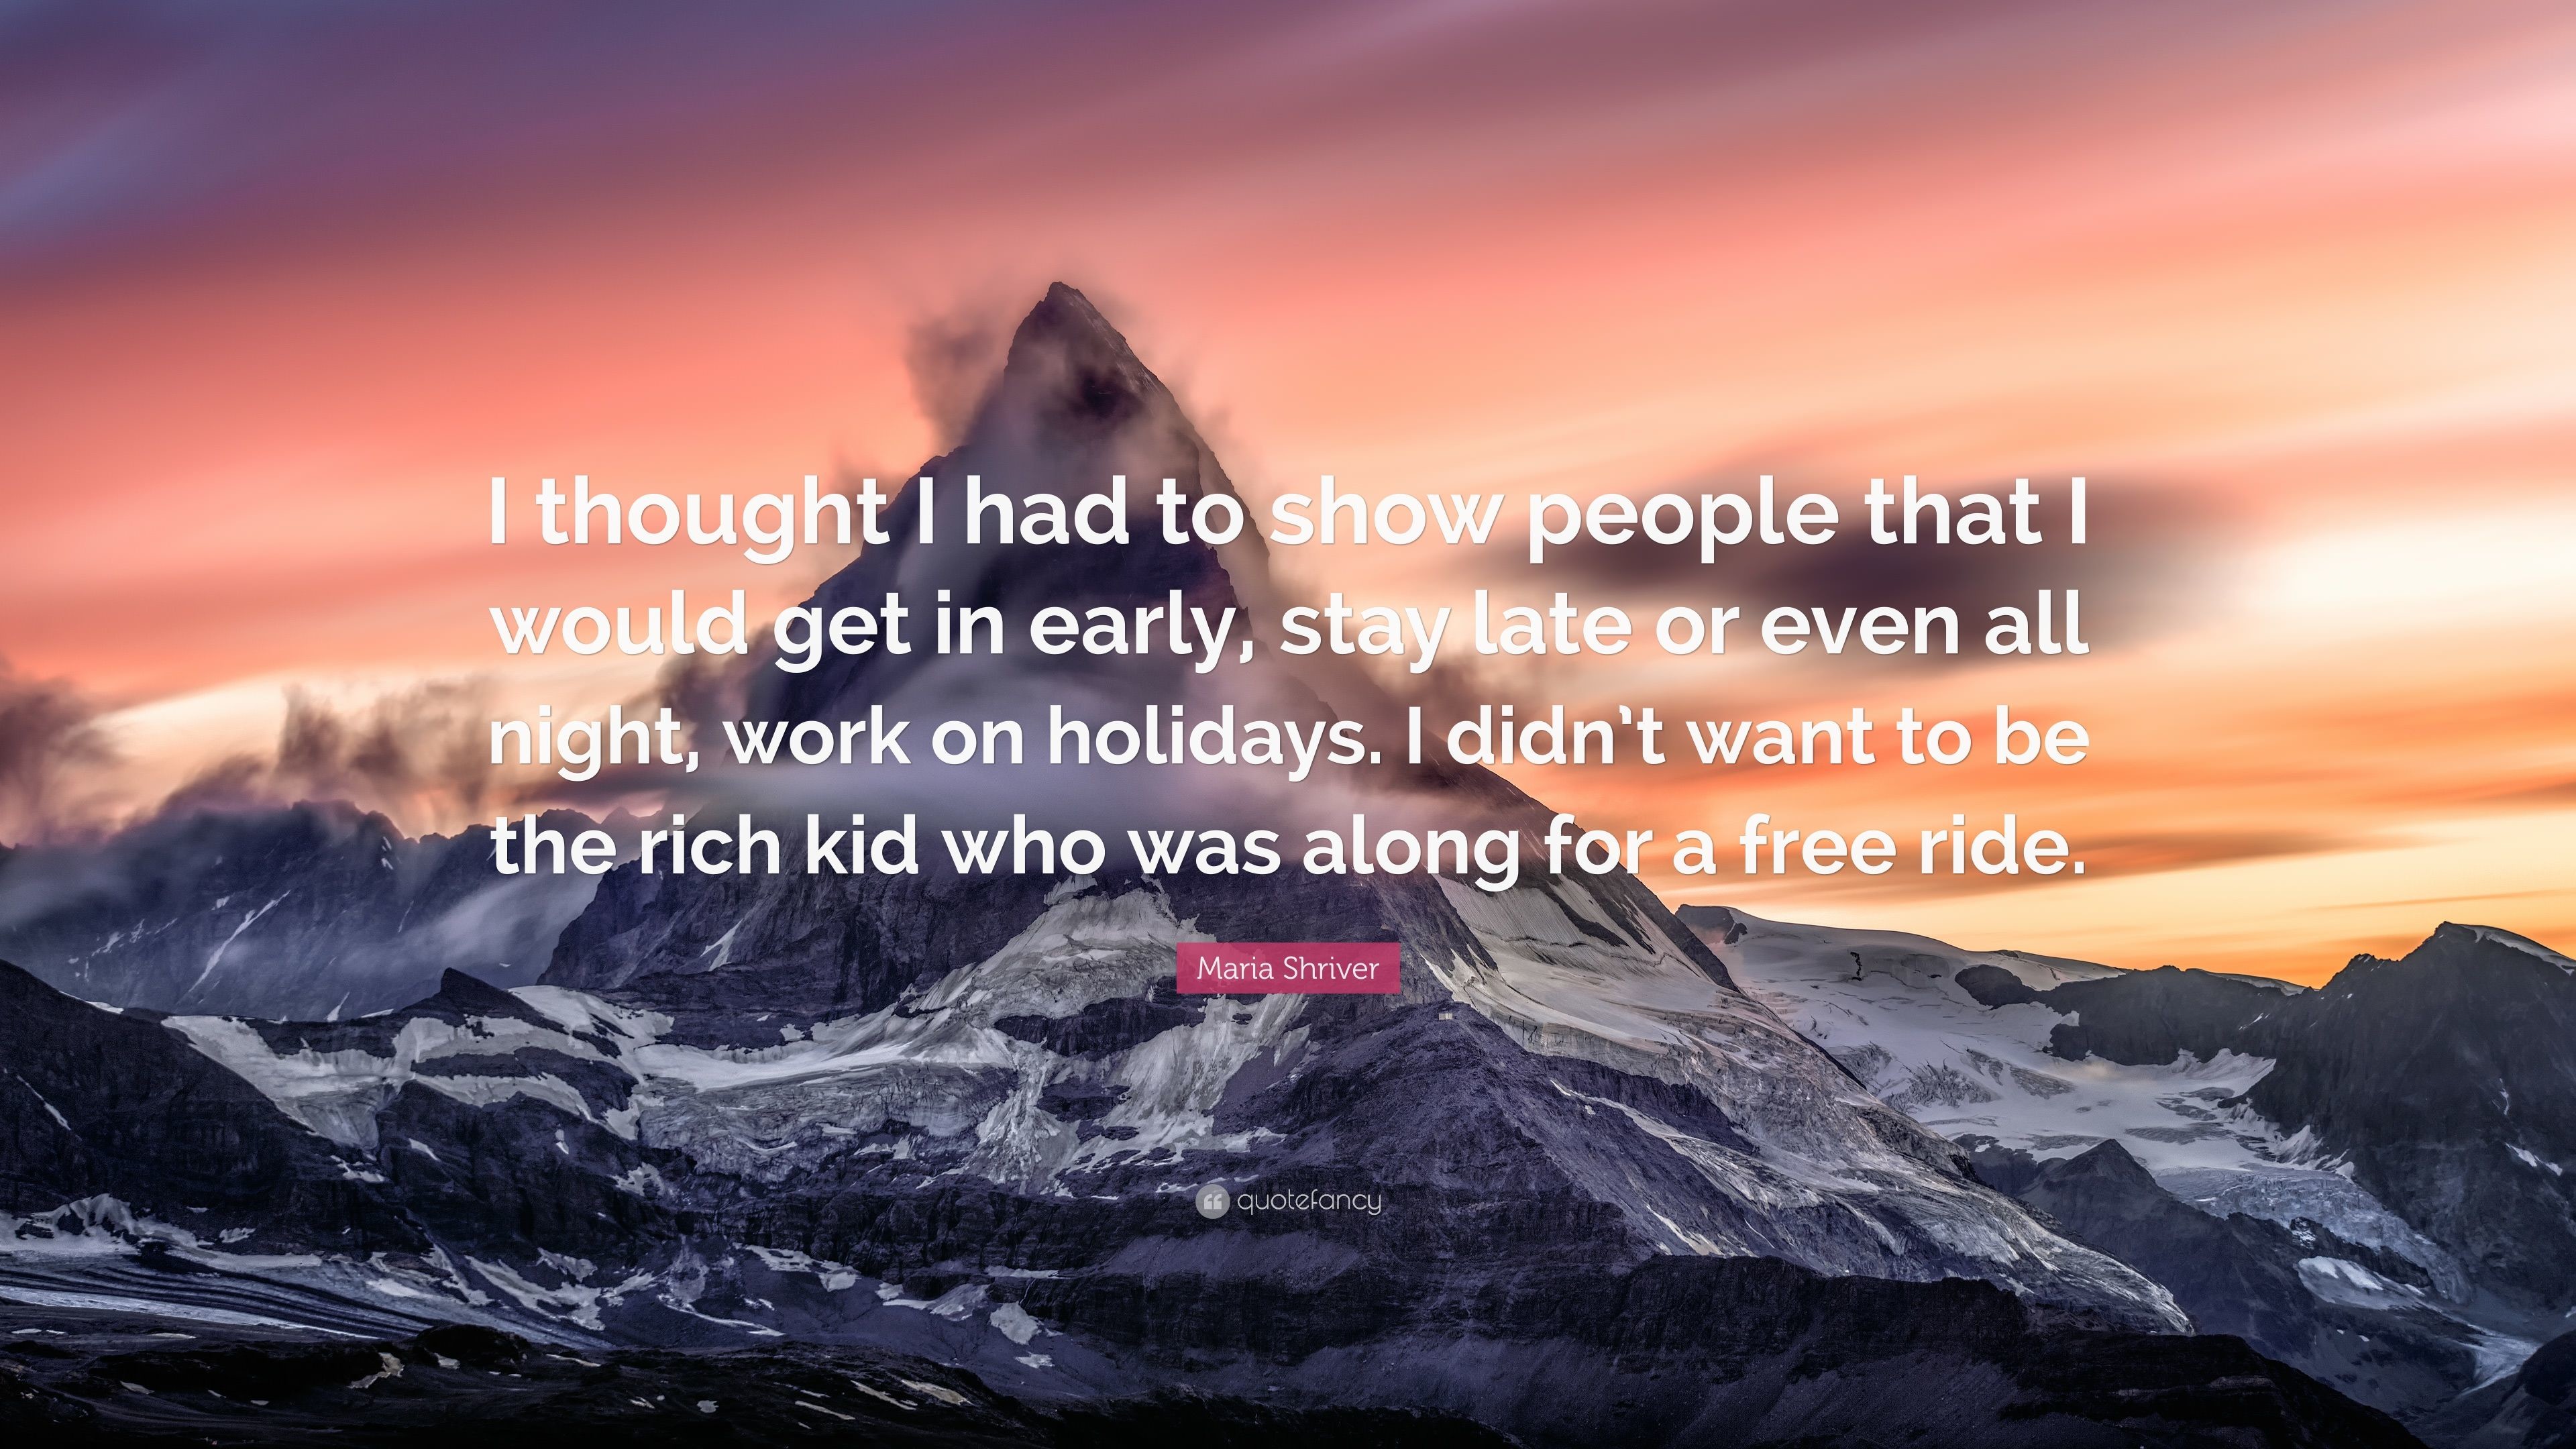 3840x2160 Maria Shriver Quote: “I thought I had to show people that I would get